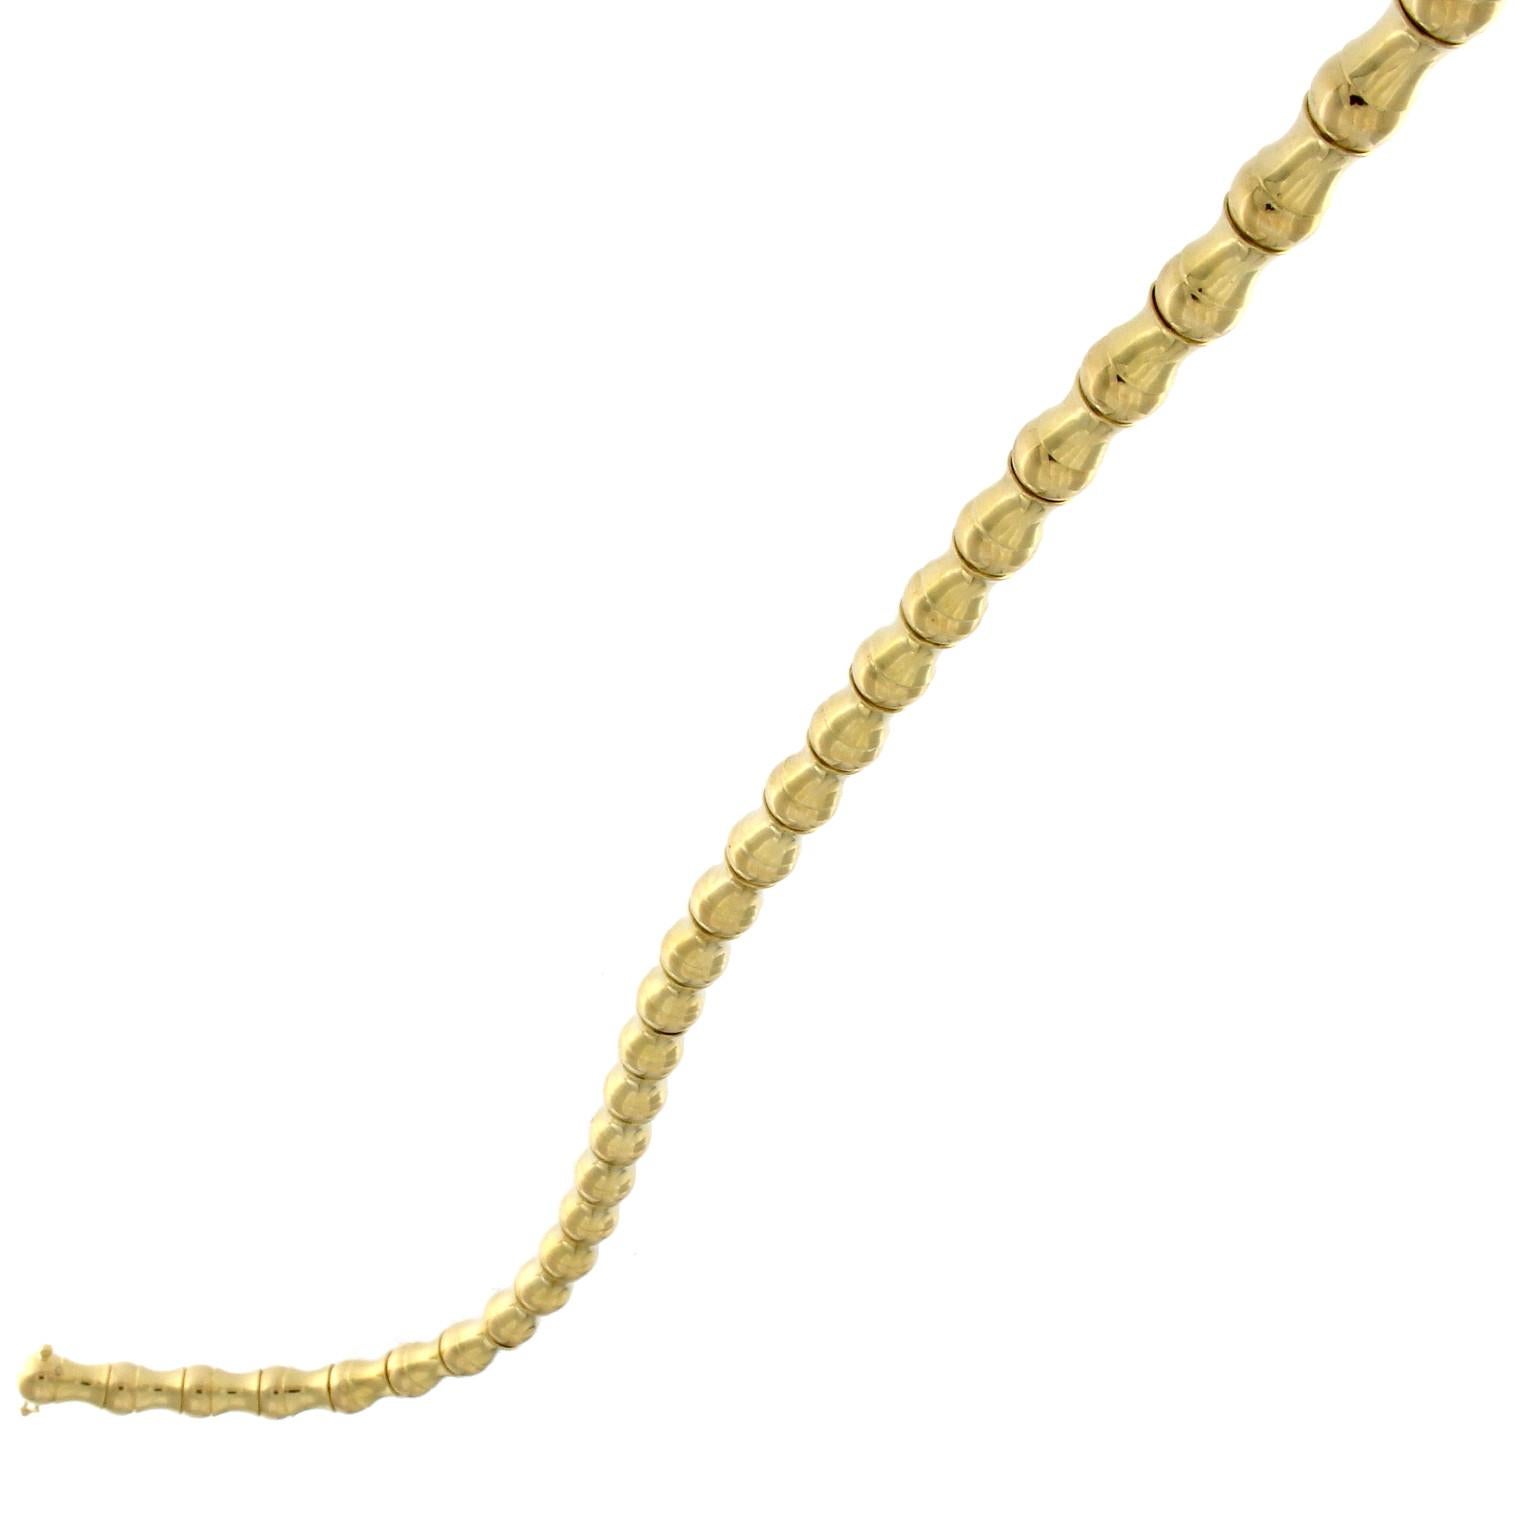 18k yellow gold necklace, a sequence of beads and curvy elements slip on a chain
the gold Weight  is GR 68.9

Stamp 10 MI 750

